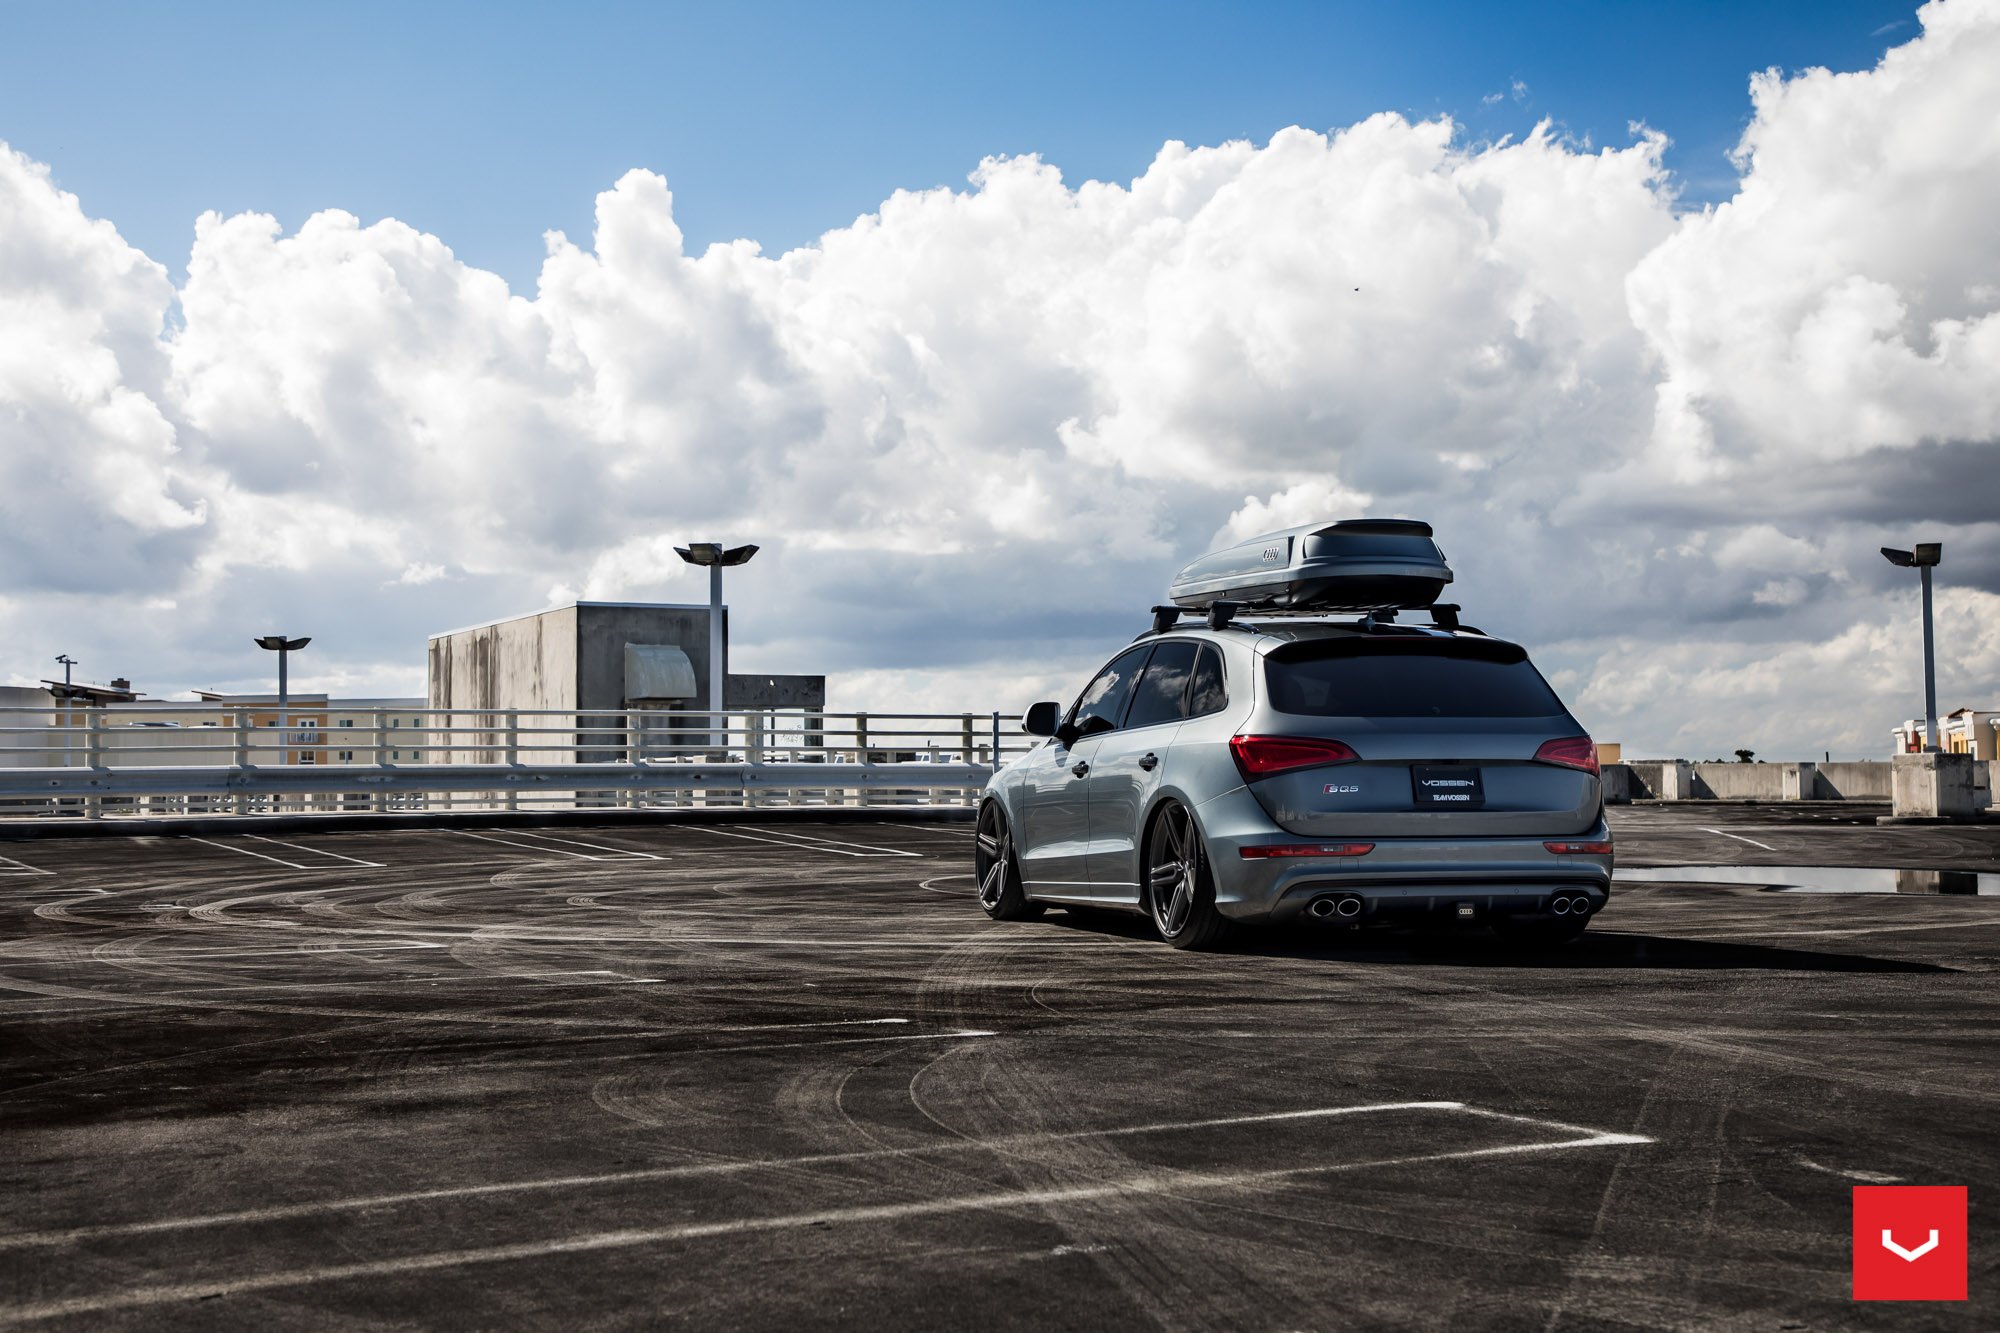 Aftermarket Rear Diffuser on Gray Audi Q5 - Photo by Vossen